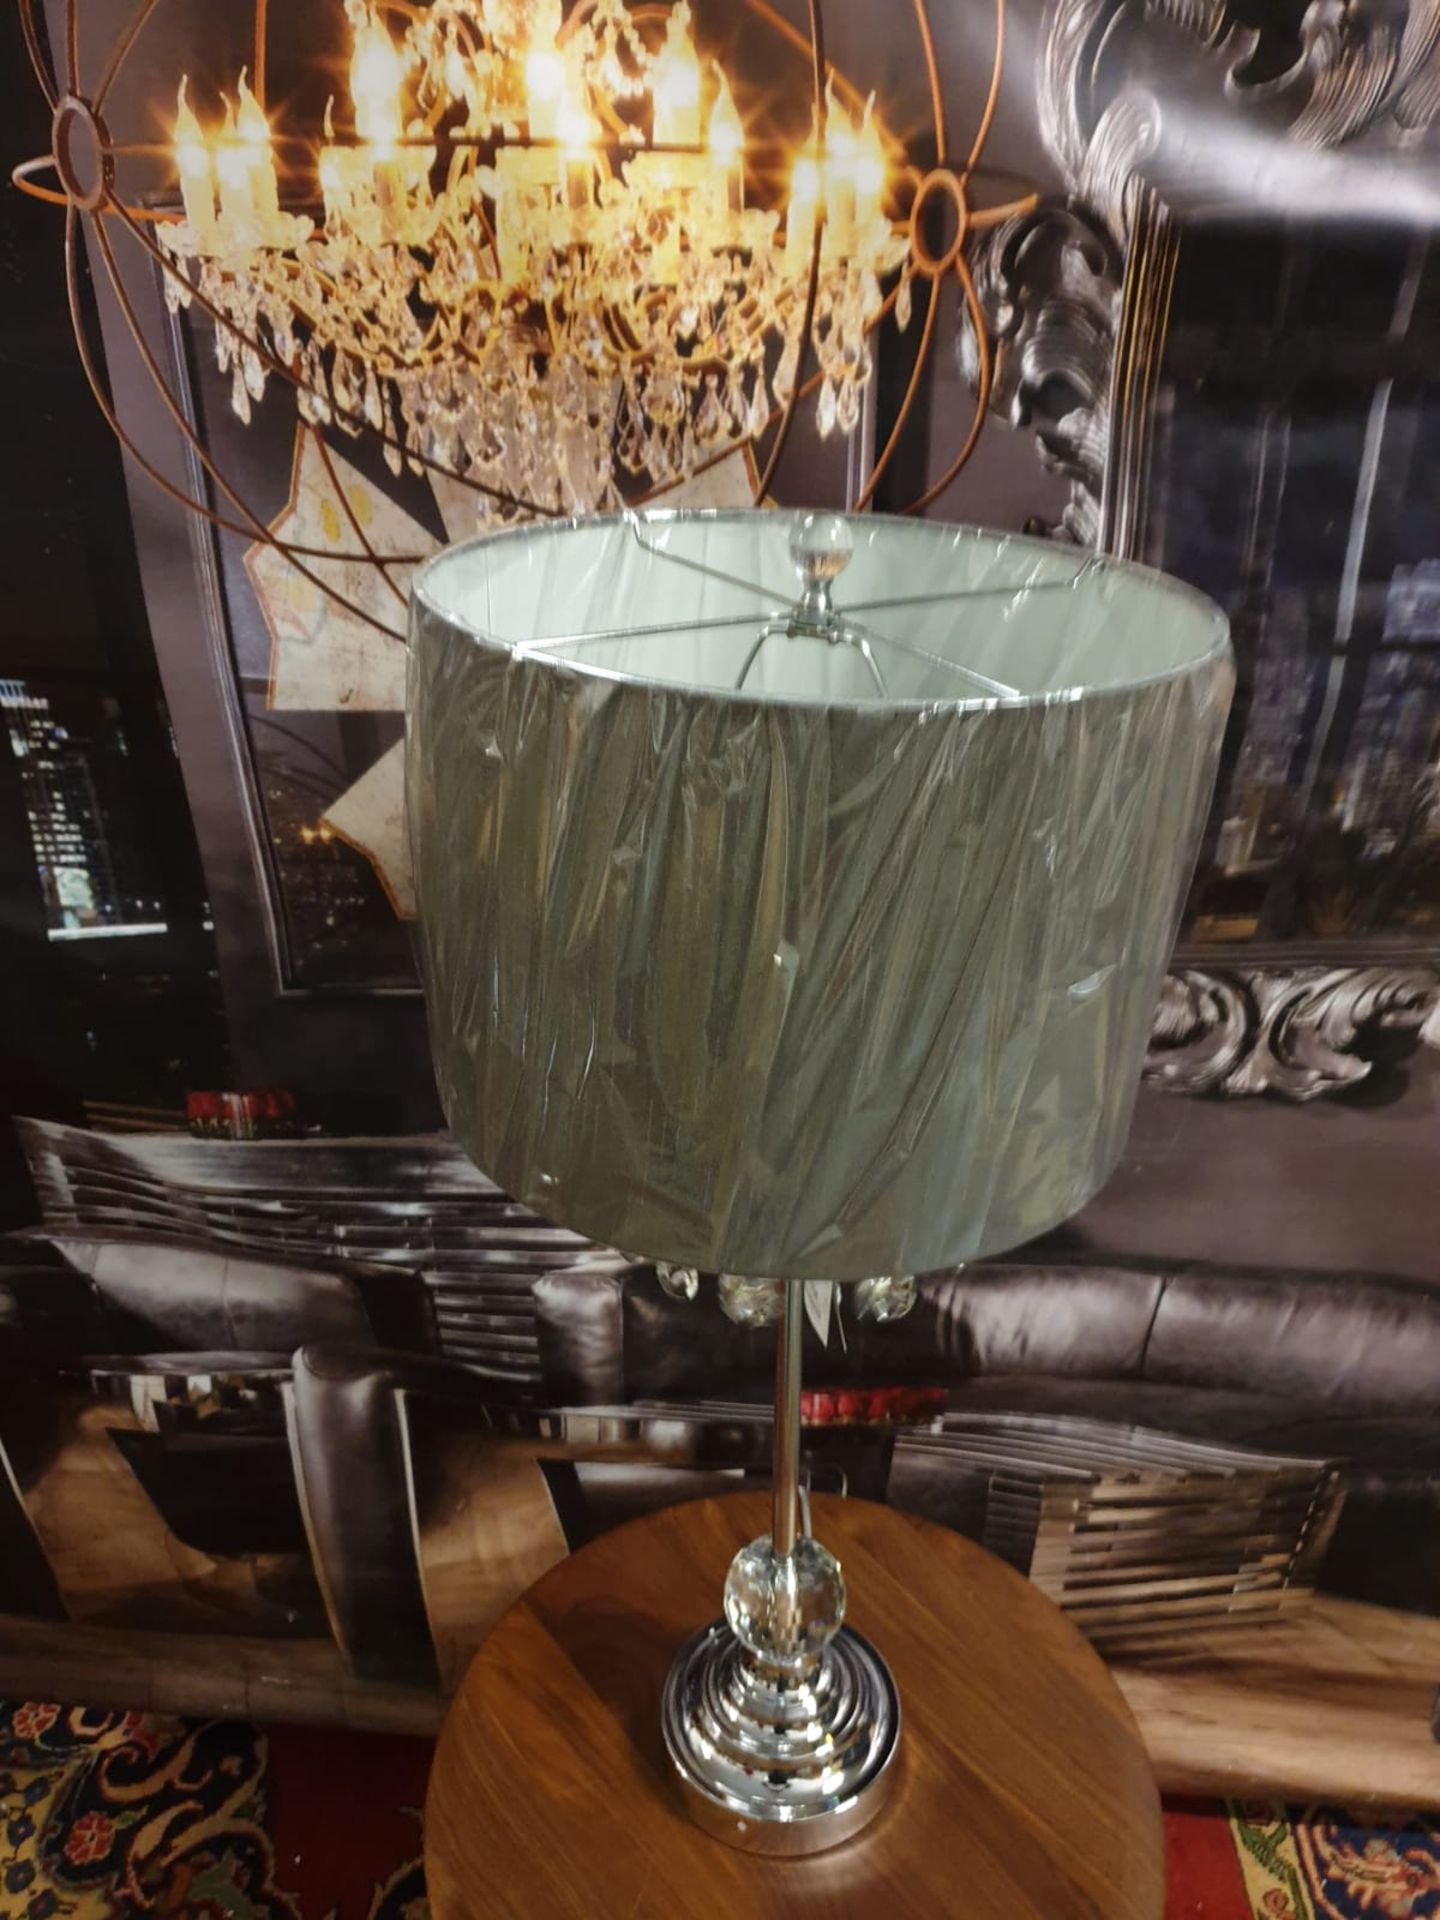 Naples Chrome Table Lamp Featuring a Chrome finish which has been beautifully complemented with a